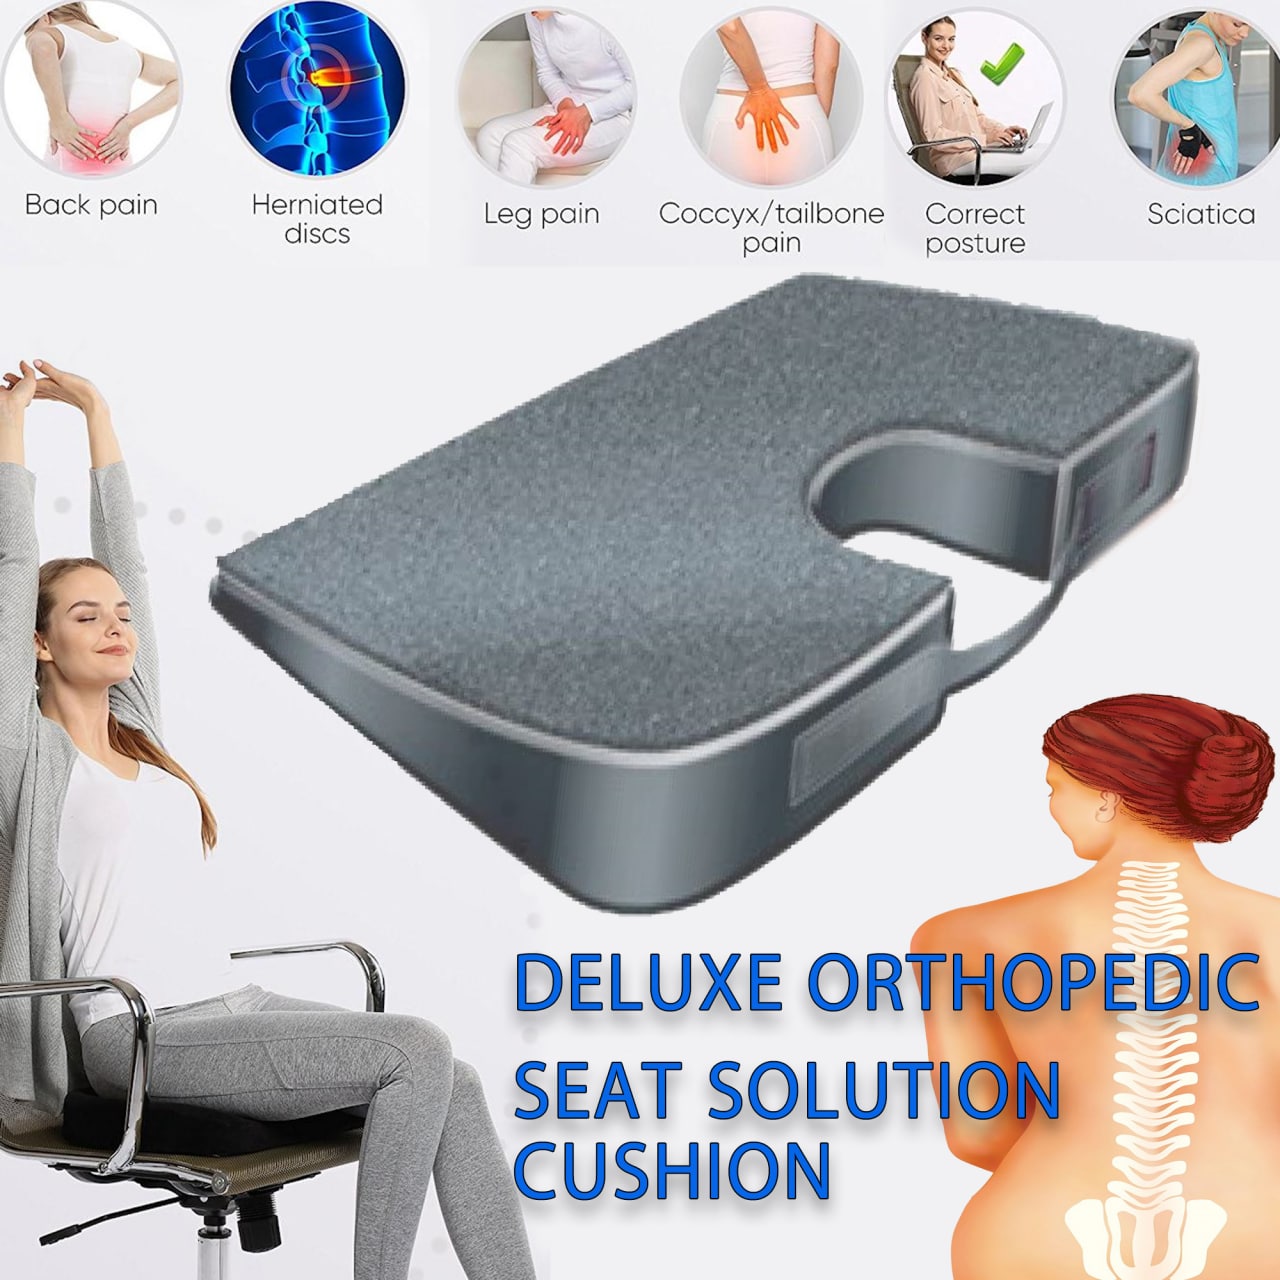 DELUXE ORTHOPEDIC SEAT SOLUTION CUSHION